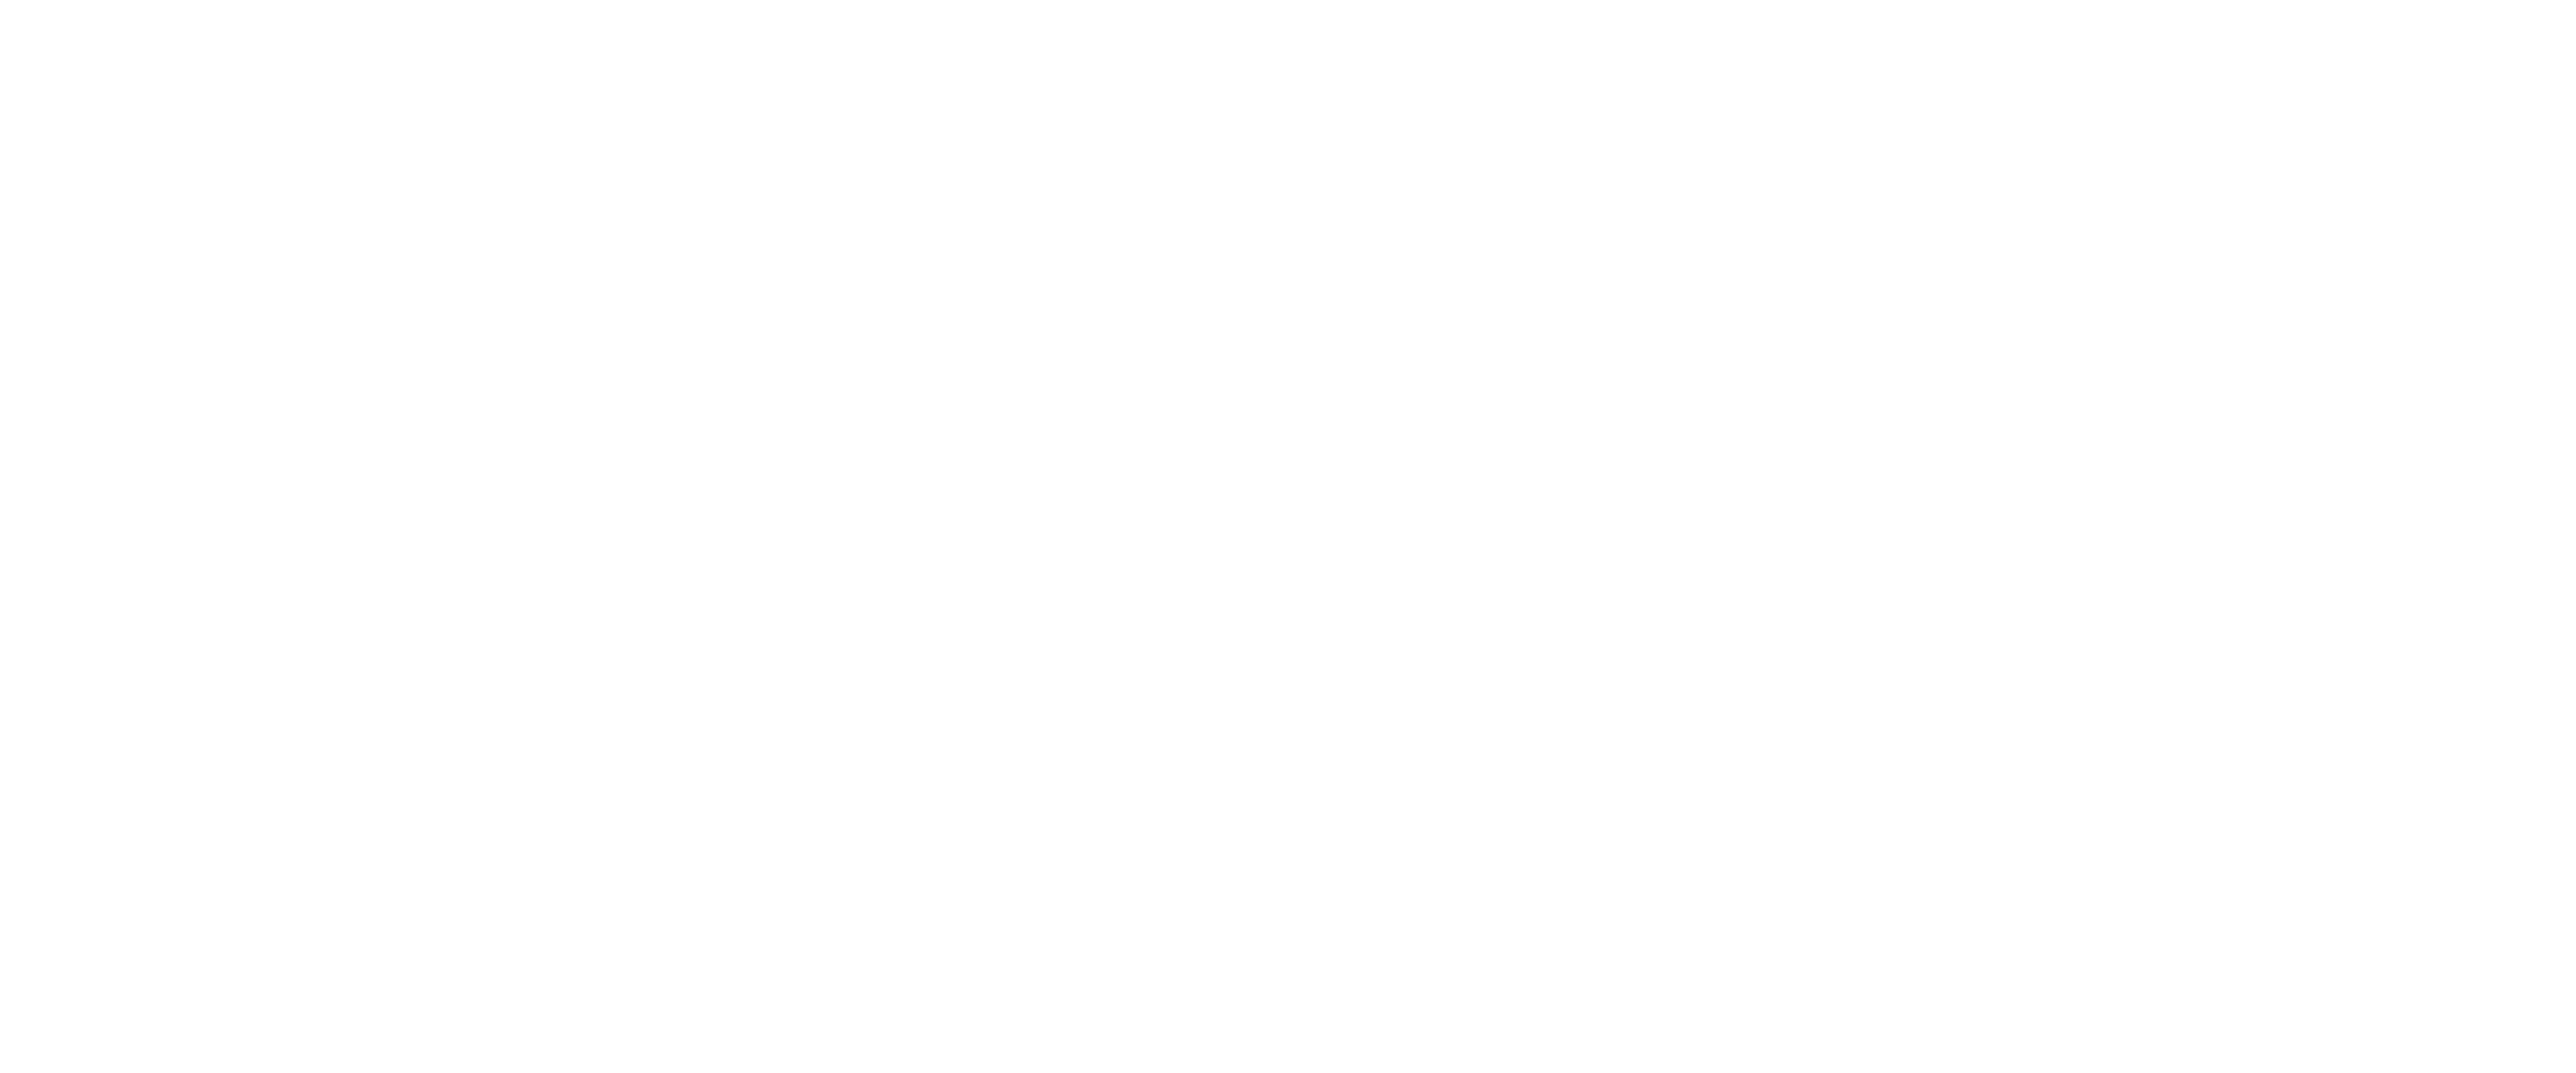 Martin One Consulting in white font